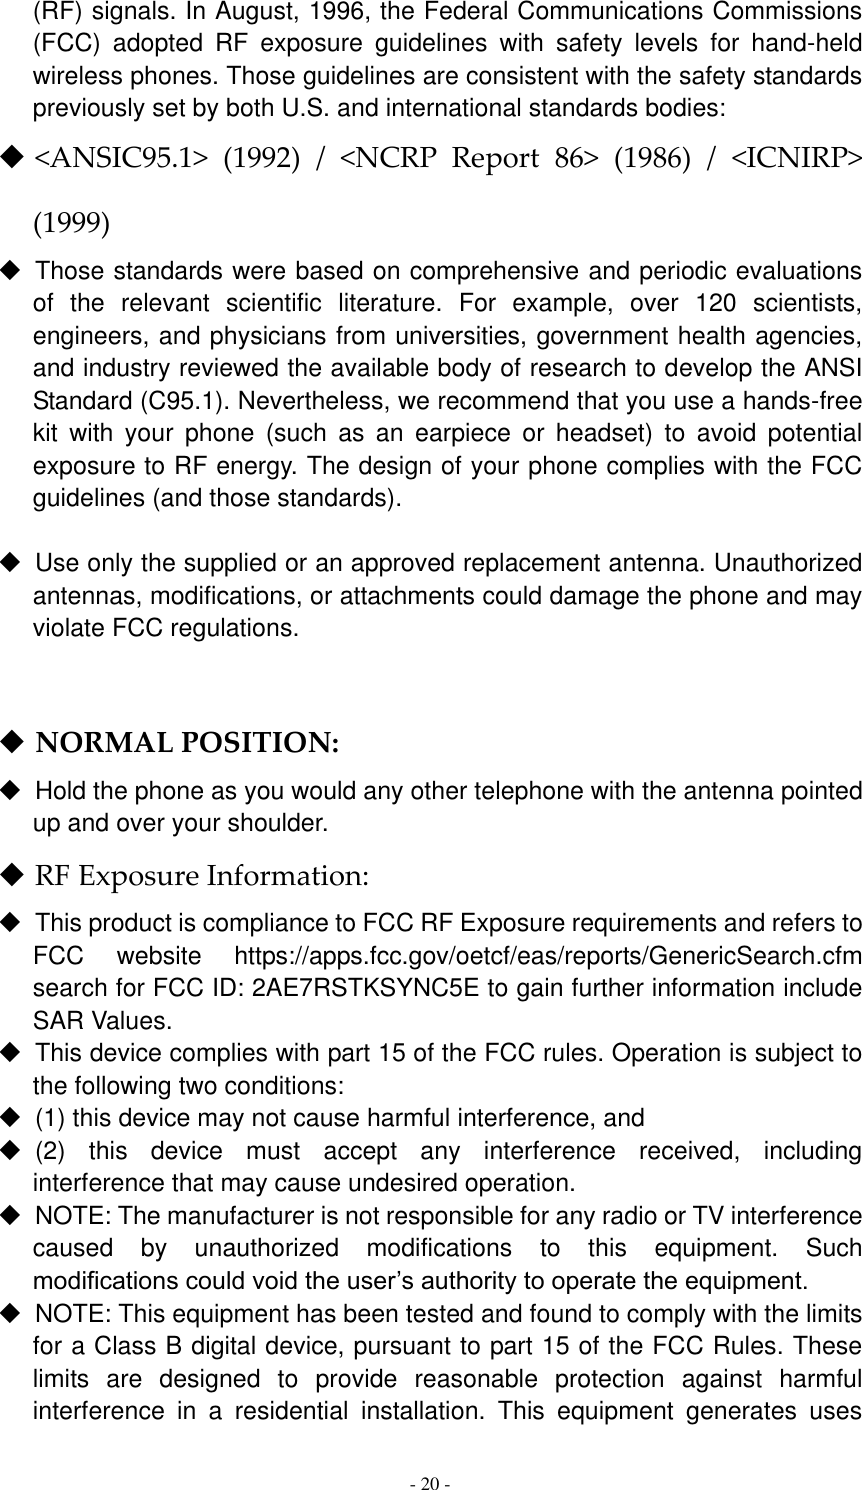  - 20 -  (RF) signals. In August, 1996, the Federal Communications Commissions (FCC)  adopted  RF  exposure  guidelines  with  safety  levels  for  hand-held wireless phones. Those guidelines are consistent with the safety standards previously set by both U.S. and international standards bodies:  &lt;ANSIC95.1&gt;  (1992)  /  &lt;NCRP  Report  86&gt;  (1986)  /  &lt;ICNIRP&gt; (1999)   Those standards were based on comprehensive and periodic evaluations of  the  relevant  scientific  literature.  For  example,  over  120  scientists, engineers, and physicians from universities, government health agencies, and industry reviewed the available body of research to develop the ANSI Standard (C95.1). Nevertheless, we recommend that you use a hands-free kit  with  your  phone  (such  as  an  earpiece  or  headset)  to  avoid  potential exposure to RF energy. The design of your phone complies with the FCC guidelines (and those standards).    Use only the supplied or an approved replacement antenna. Unauthorized antennas, modifications, or attachments could damage the phone and may violate FCC regulations.     NORMAL POSITION:     Hold the phone as you would any other telephone with the antenna pointed up and over your shoulder.  RF Exposure Information:   This product is compliance to FCC RF Exposure requirements and refers to FCC  website  https://apps.fcc.gov/oetcf/eas/reports/GenericSearch.cfm  search for FCC ID: 2AE7RSTKSYNC5E to gain further information include SAR Values.     This device complies with part 15 of the FCC rules. Operation is subject to the following two conditions:   (1) this device may not cause harmful interference, and   (2)  this  device  must  accept  any  interference  received,  including interference that may cause undesired operation.   NOTE: The manufacturer is not responsible for any radio or TV interference caused  by  unauthorized  modifications  to  this  equipment.  Such modifications could void the user’s authority to operate the equipment.   NOTE: This equipment has been tested and found to comply with the limits for a Class B digital device, pursuant to part 15 of the FCC Rules. These limits  are  designed  to  provide  reasonable  protection  against  harmful interference  in  a  residential  installation.  This  equipment  generates  uses 